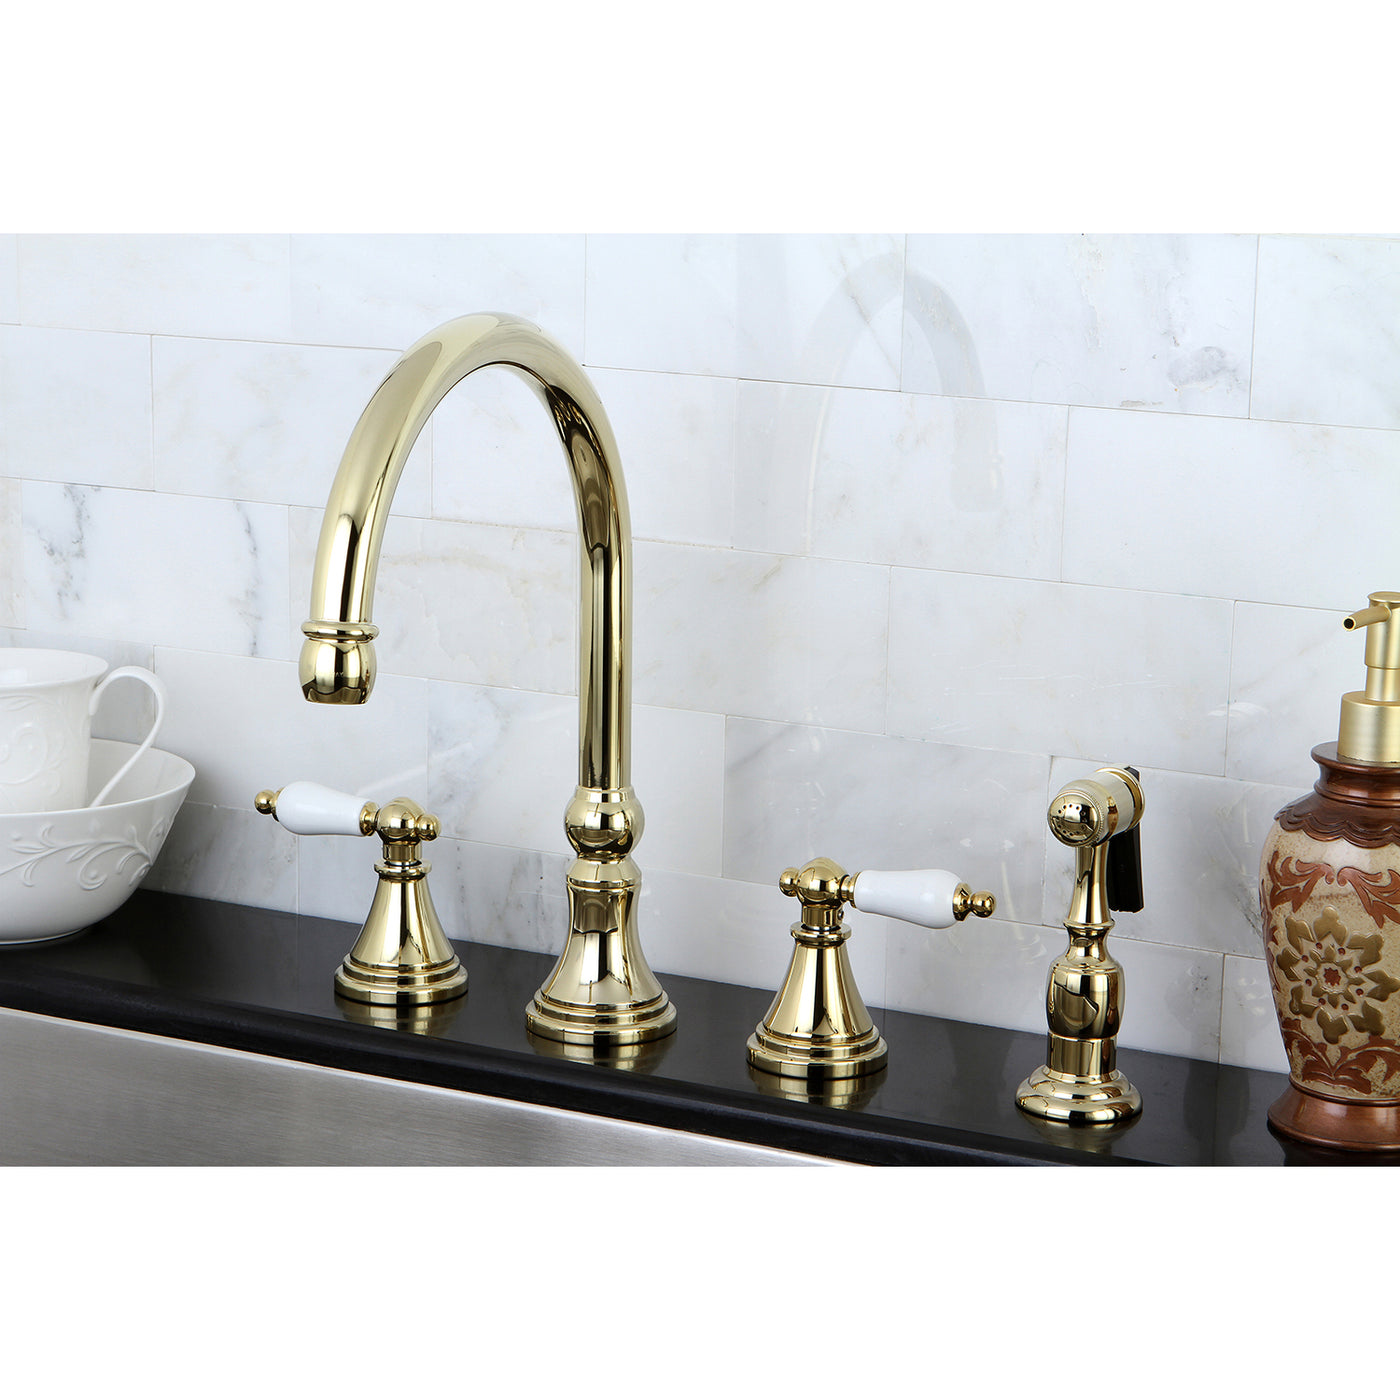 Elements of Design ES2792PLBS Widespread Kitchen Faucet with Brass Sprayer, Polished Brass